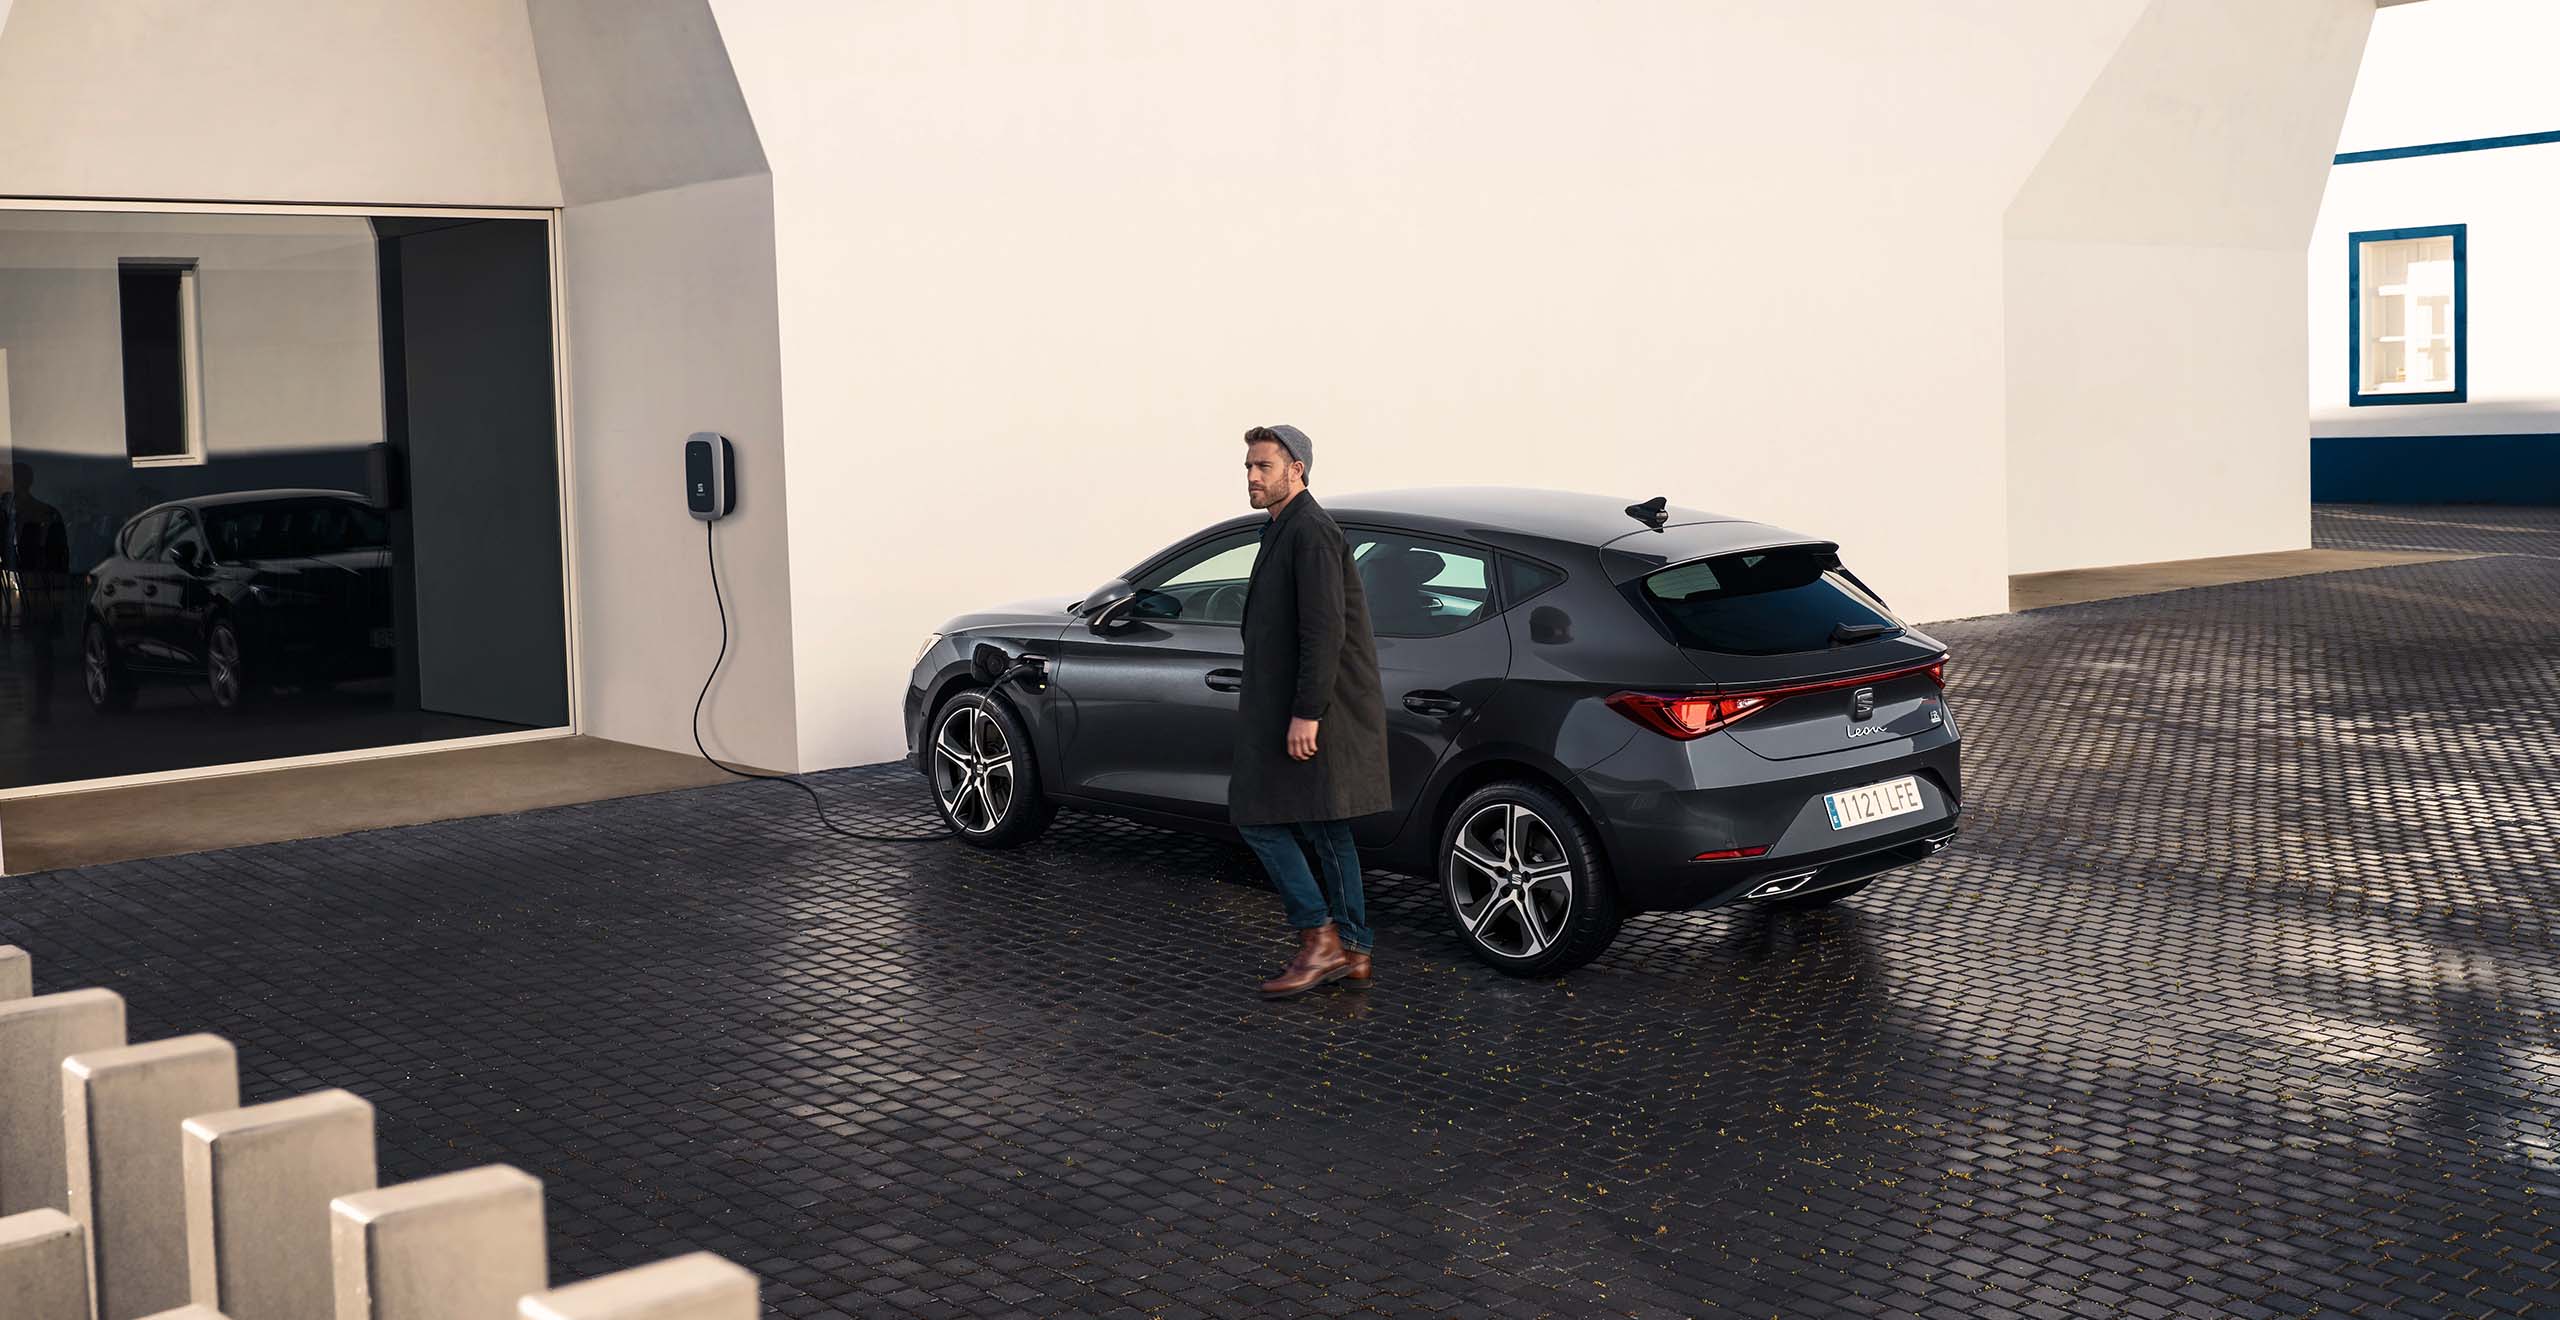 seat leon e-hybrid on charging SEAT Charger with man